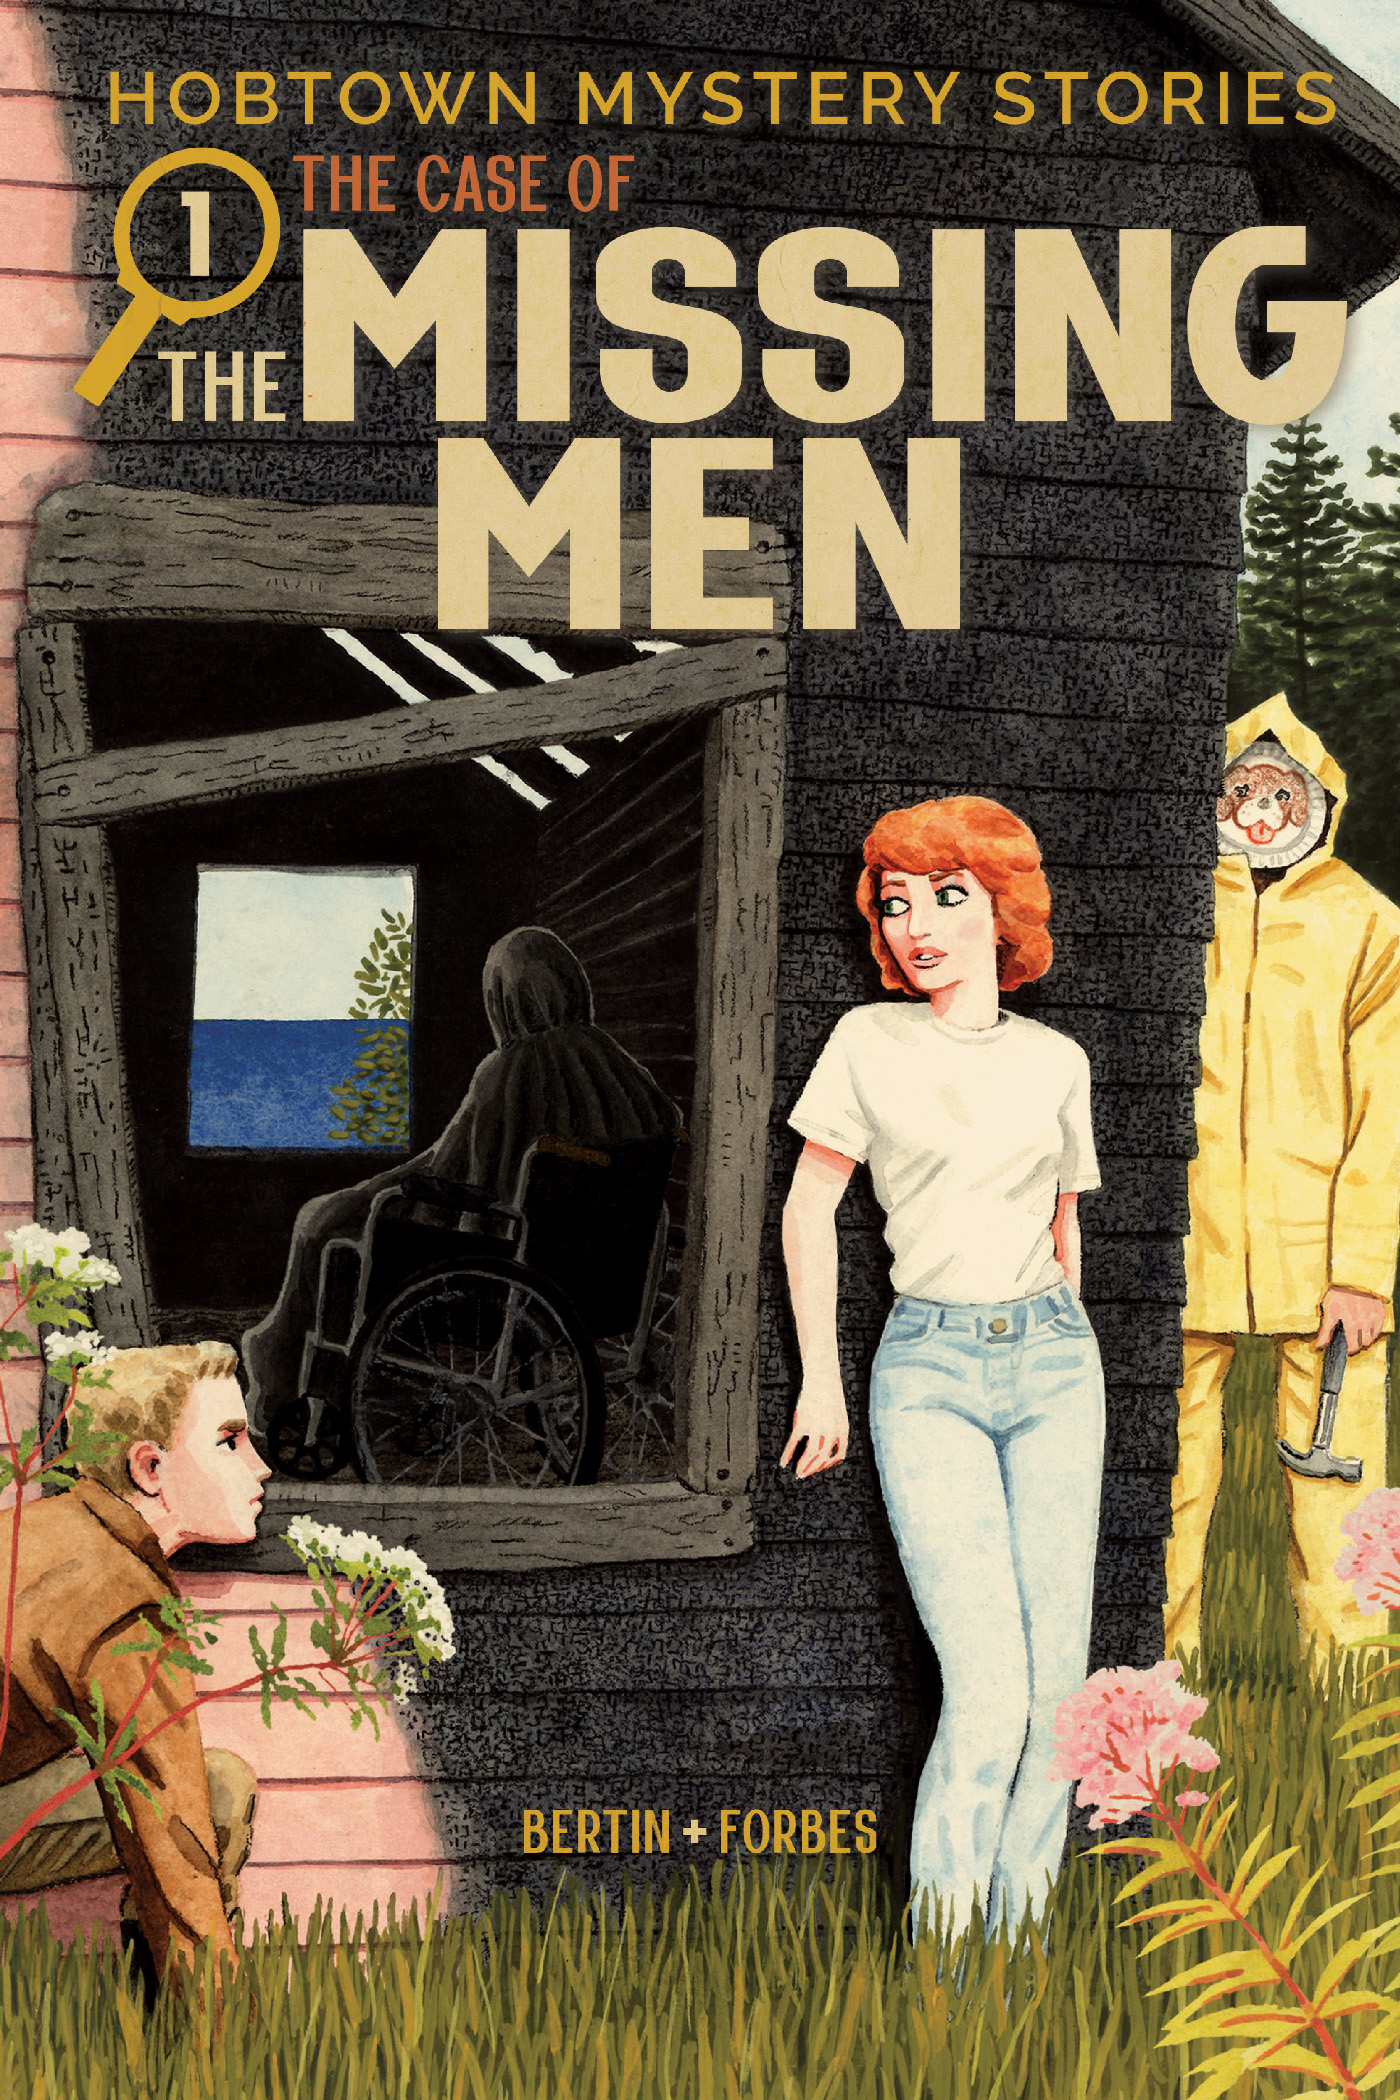 Hobtown Mystery Stories Graphic Novel Volume 1 The Case of the Missing Men